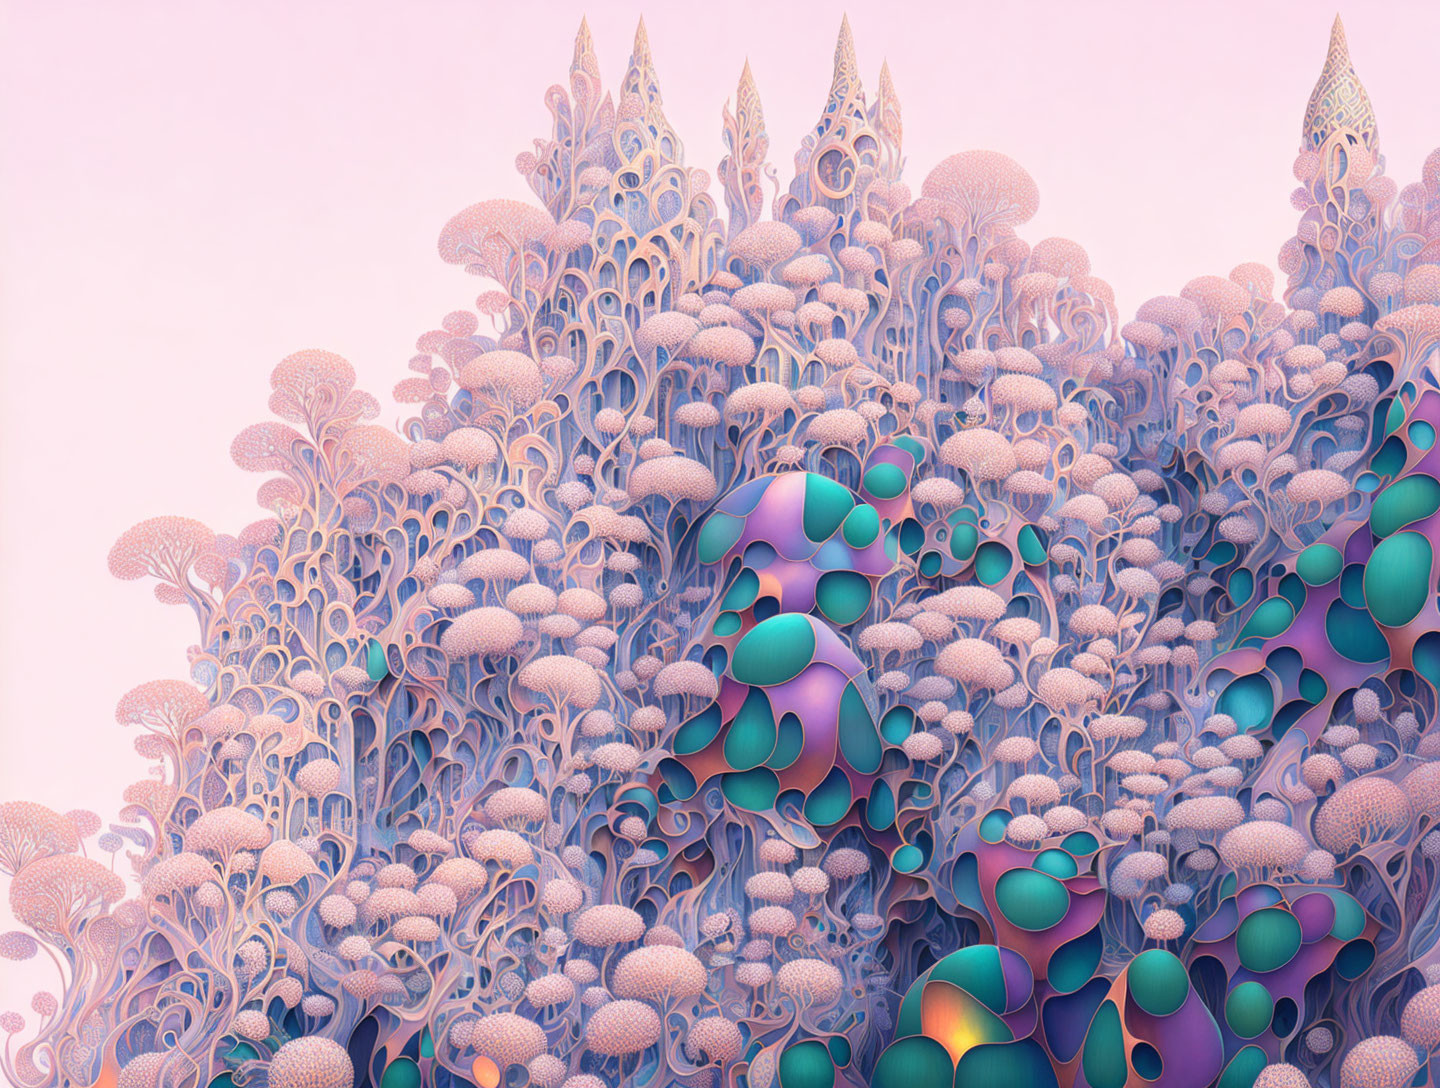 Fractal-like Coral Formations in Pastel Pink and Blue-Green Palette